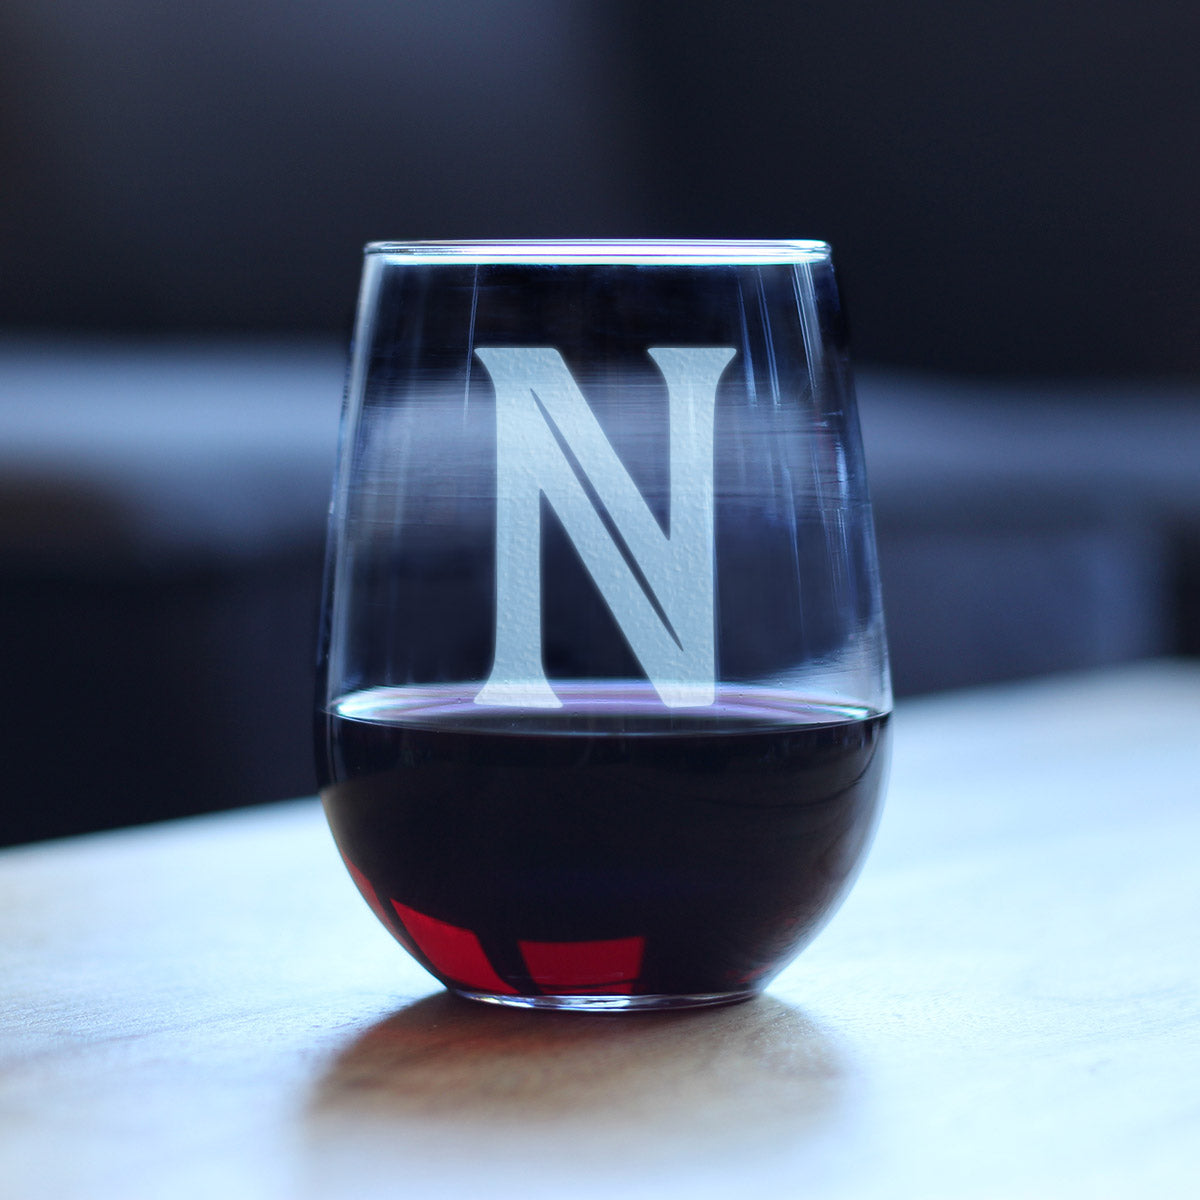 Monogram Bold Letter N - Stemless Wine Glass - Personalized Gifts for Women and Men - Large Engraved Glasses